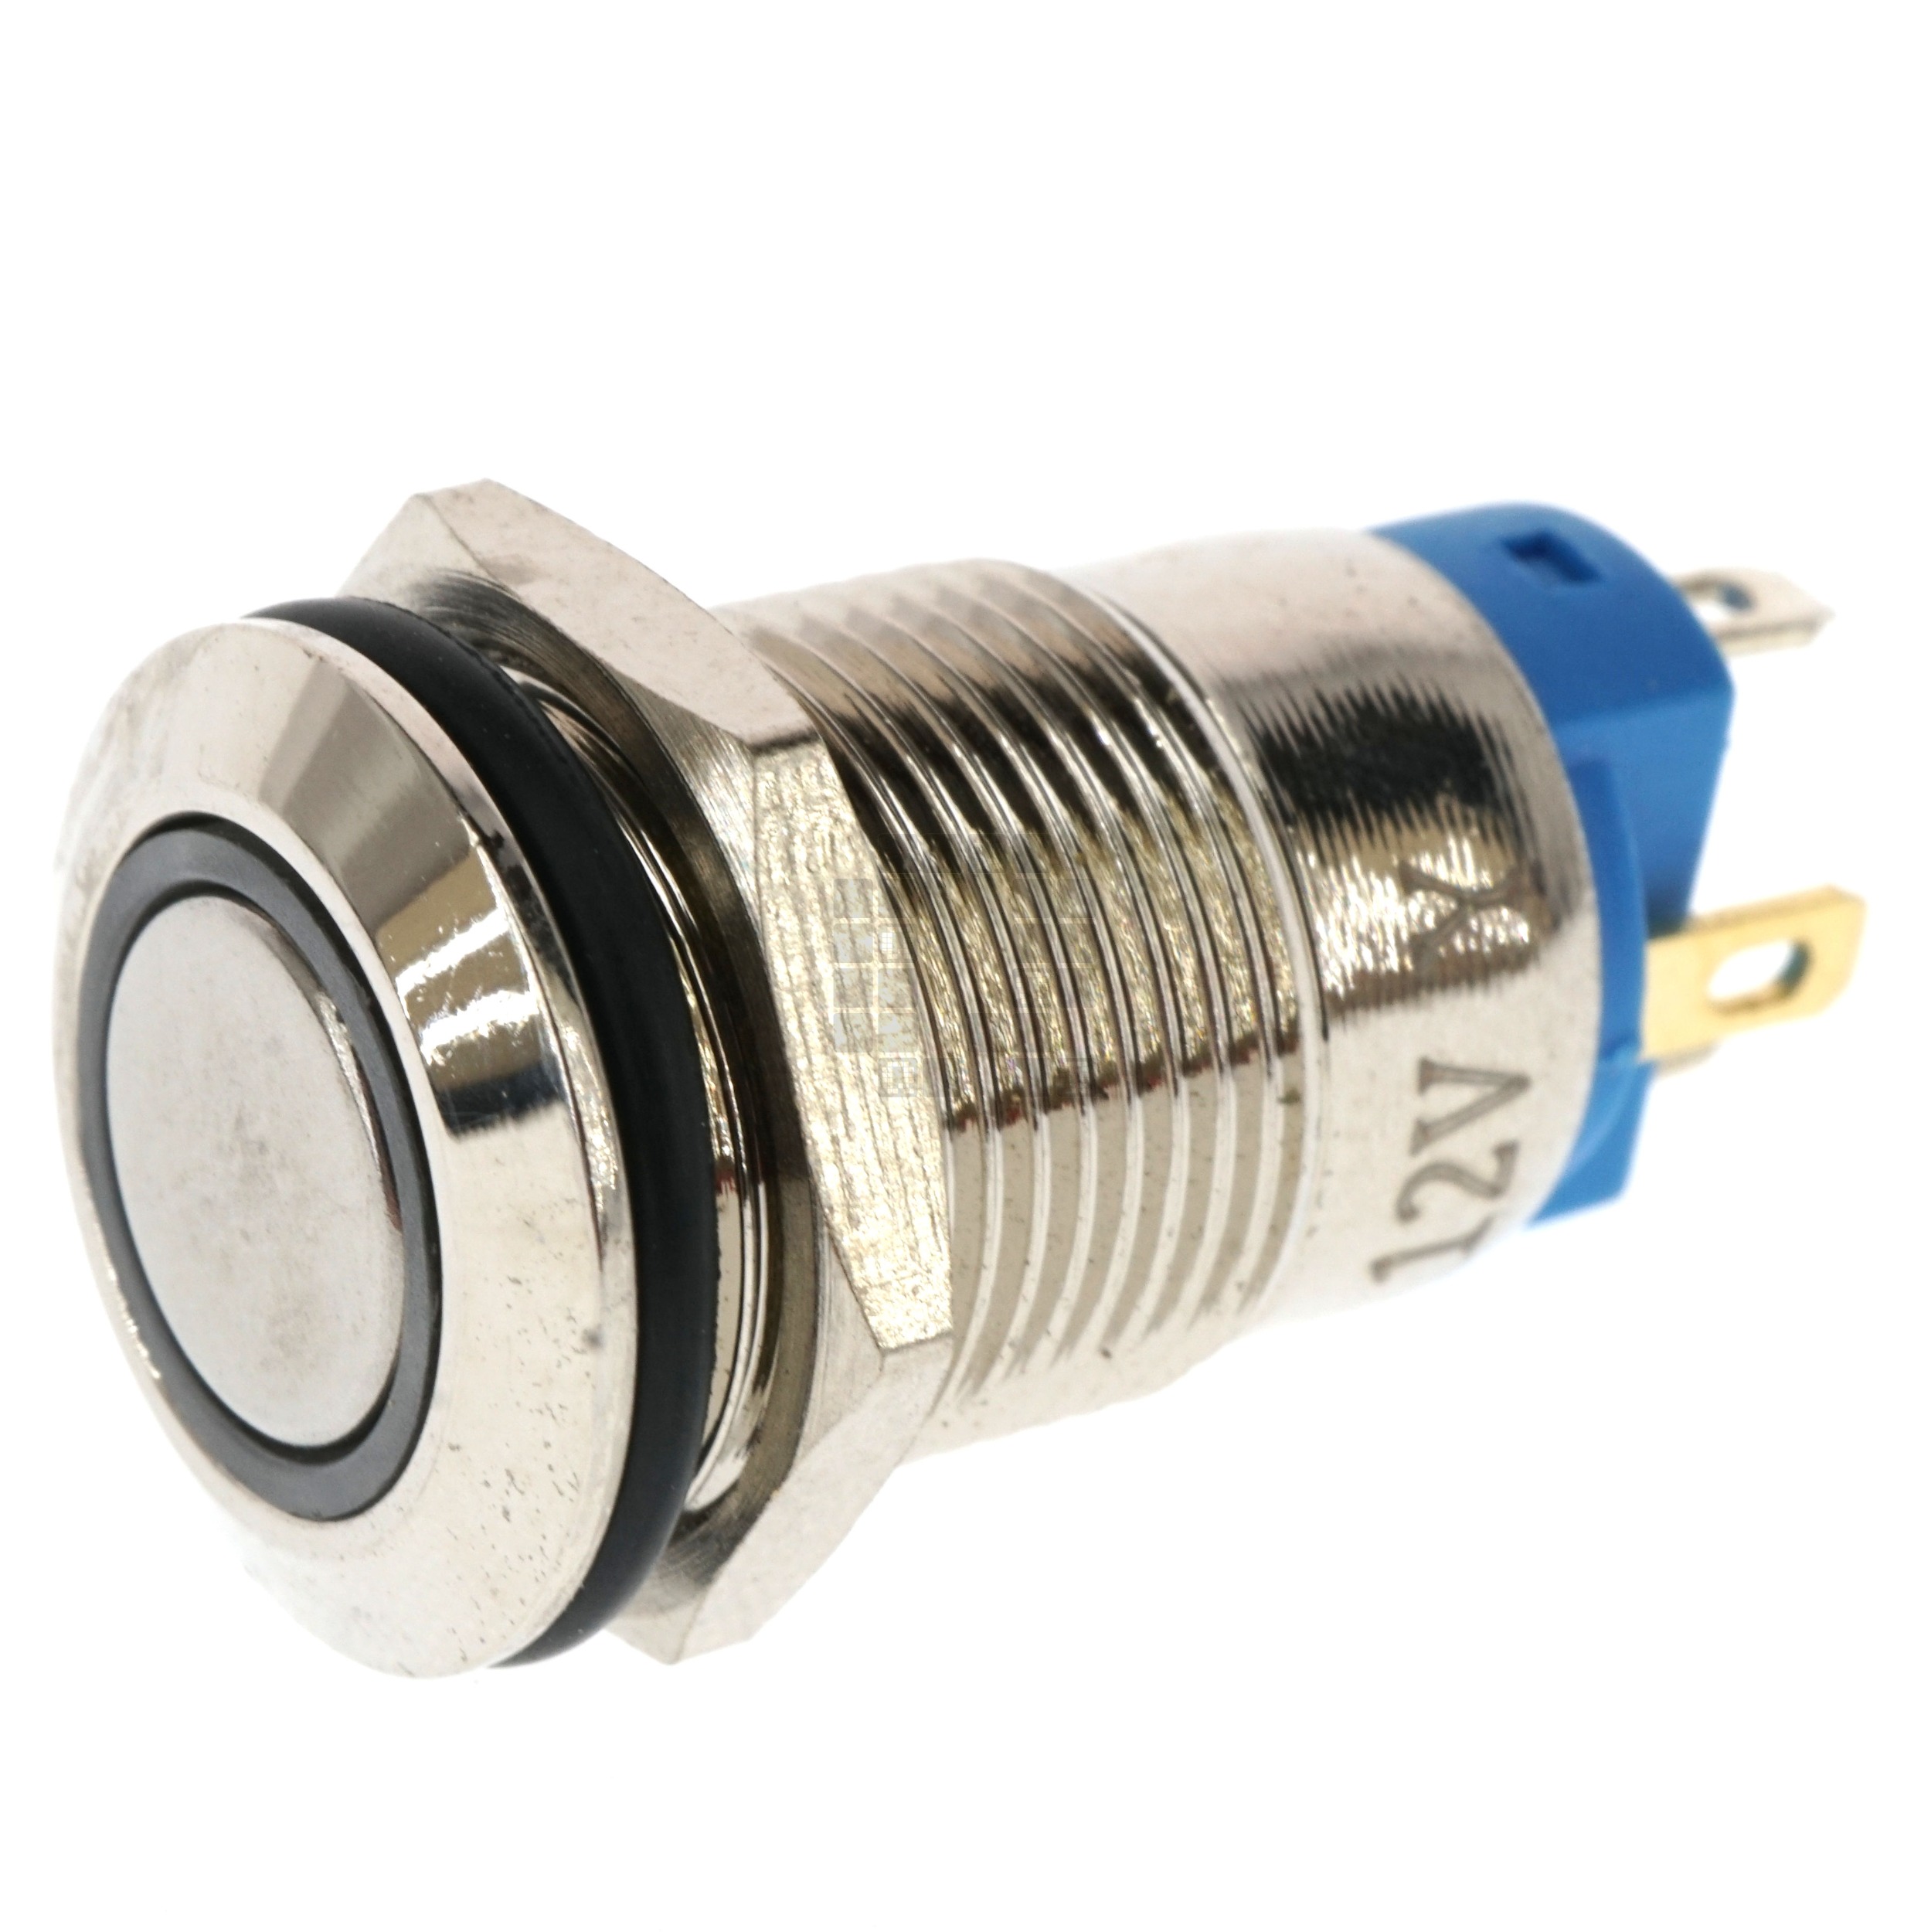 12mm Threaded Metal Pushbutton, Locking, Yellow LED, 12-24VDC, Lighted Ring/Circle, IP65, SPST